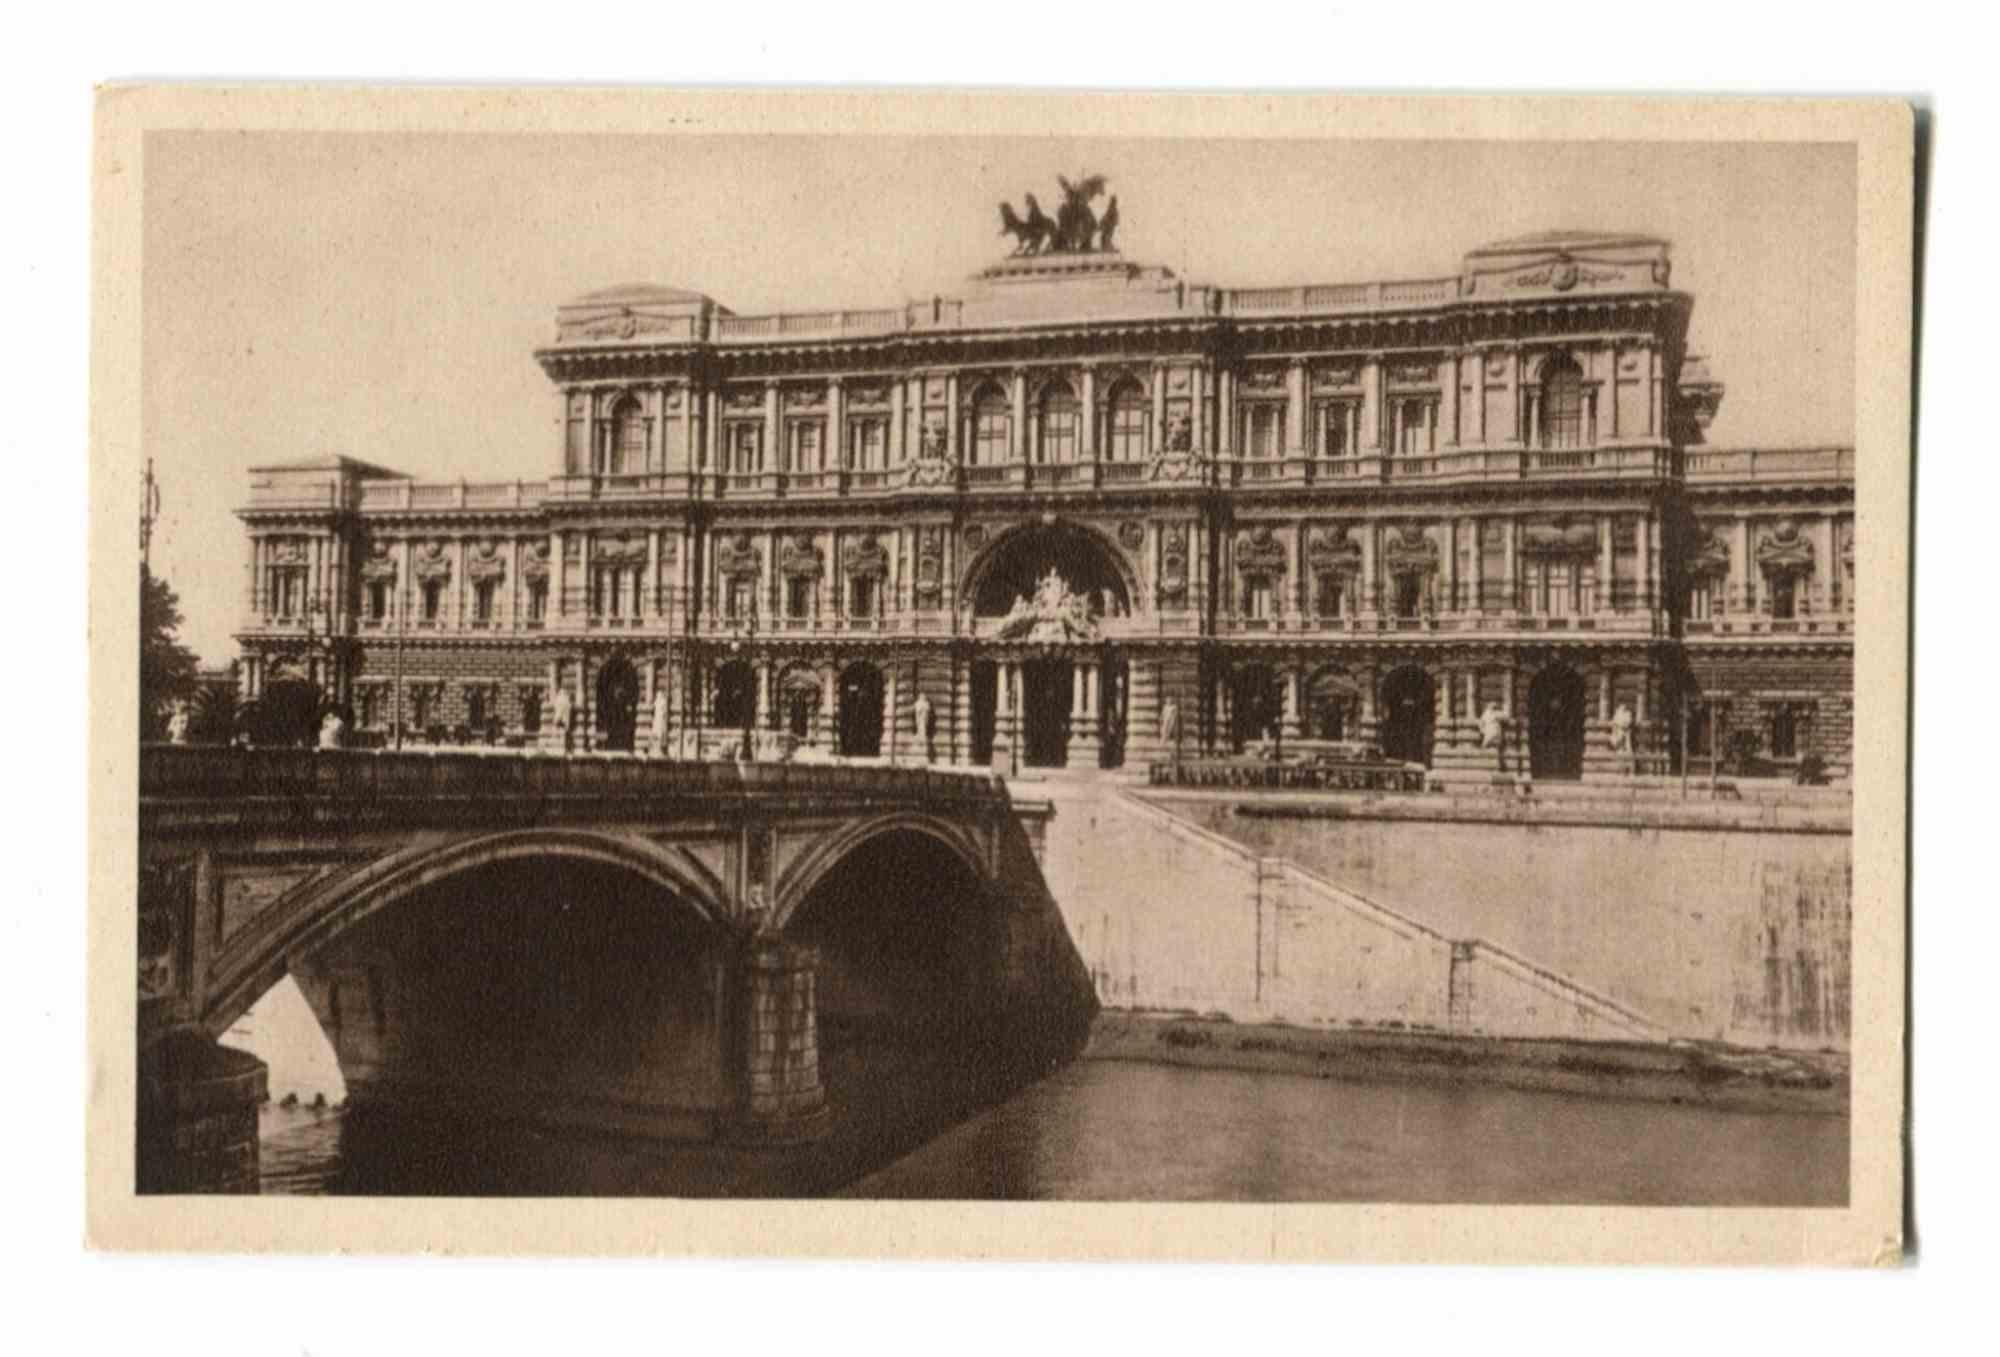 Unknown Portrait Photograph - Rome, The Palace of Justice - Vintage Photo - 1930s